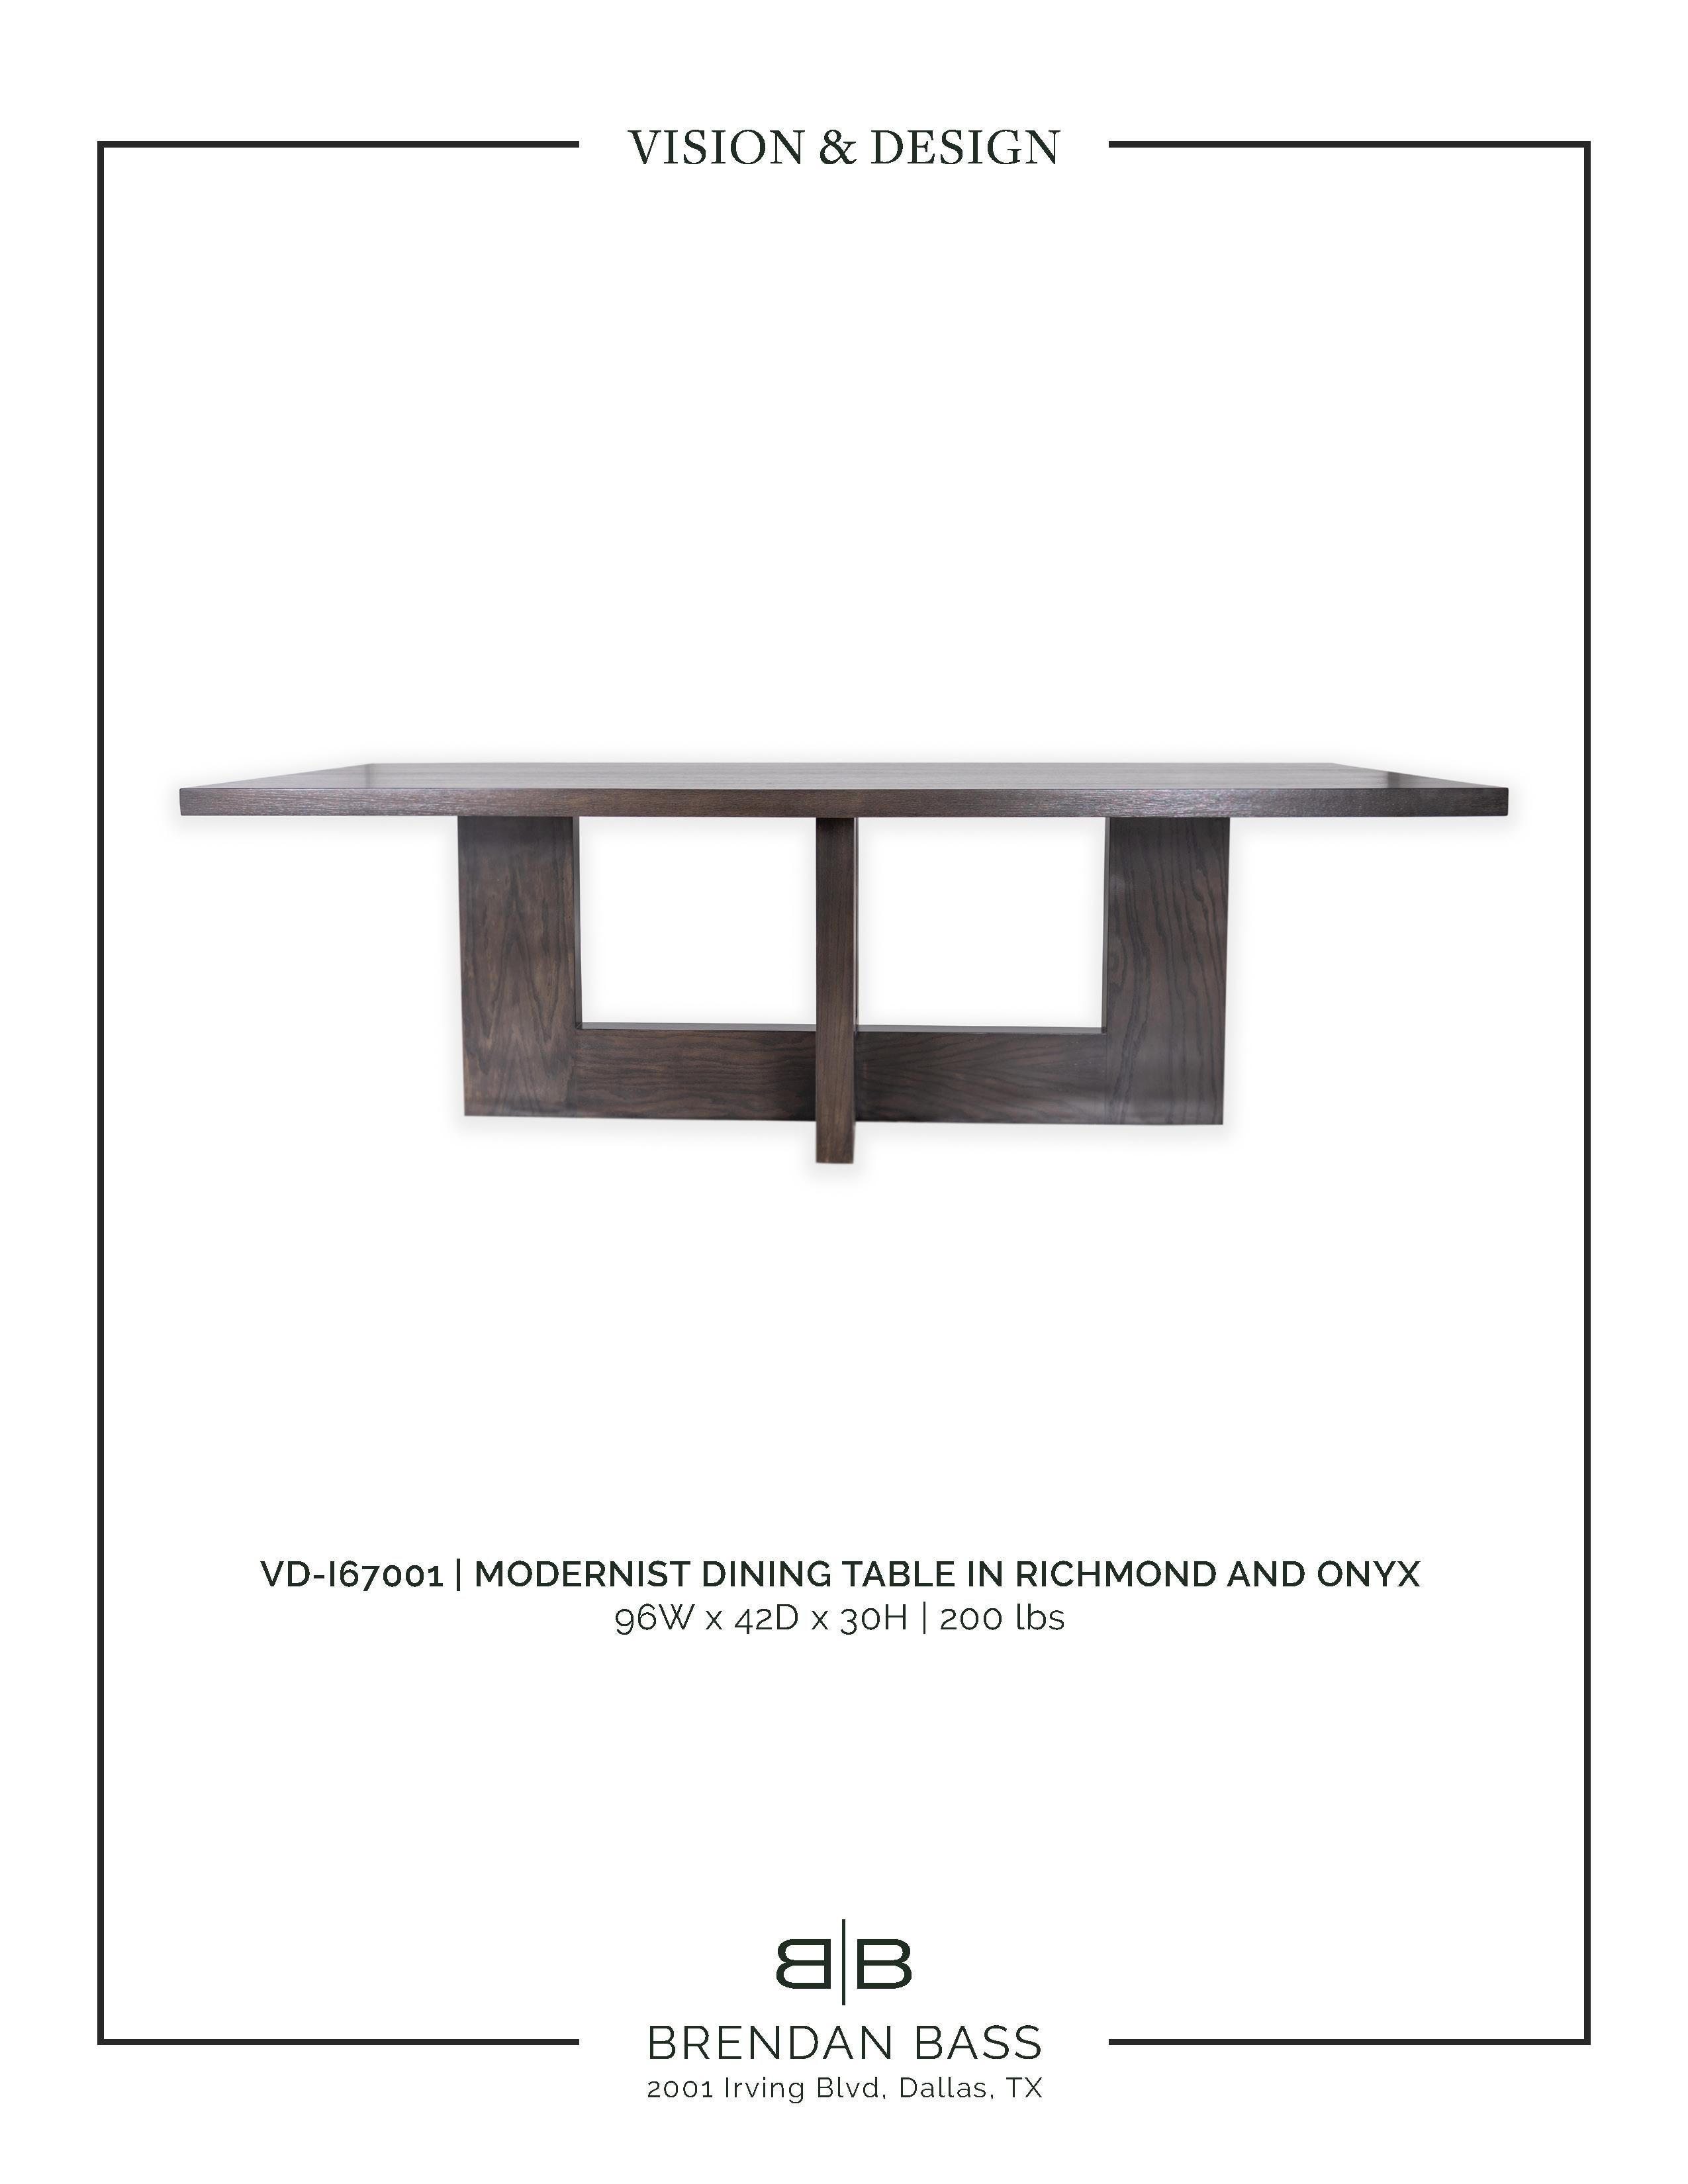 Modernist Dining Table For Sale 1